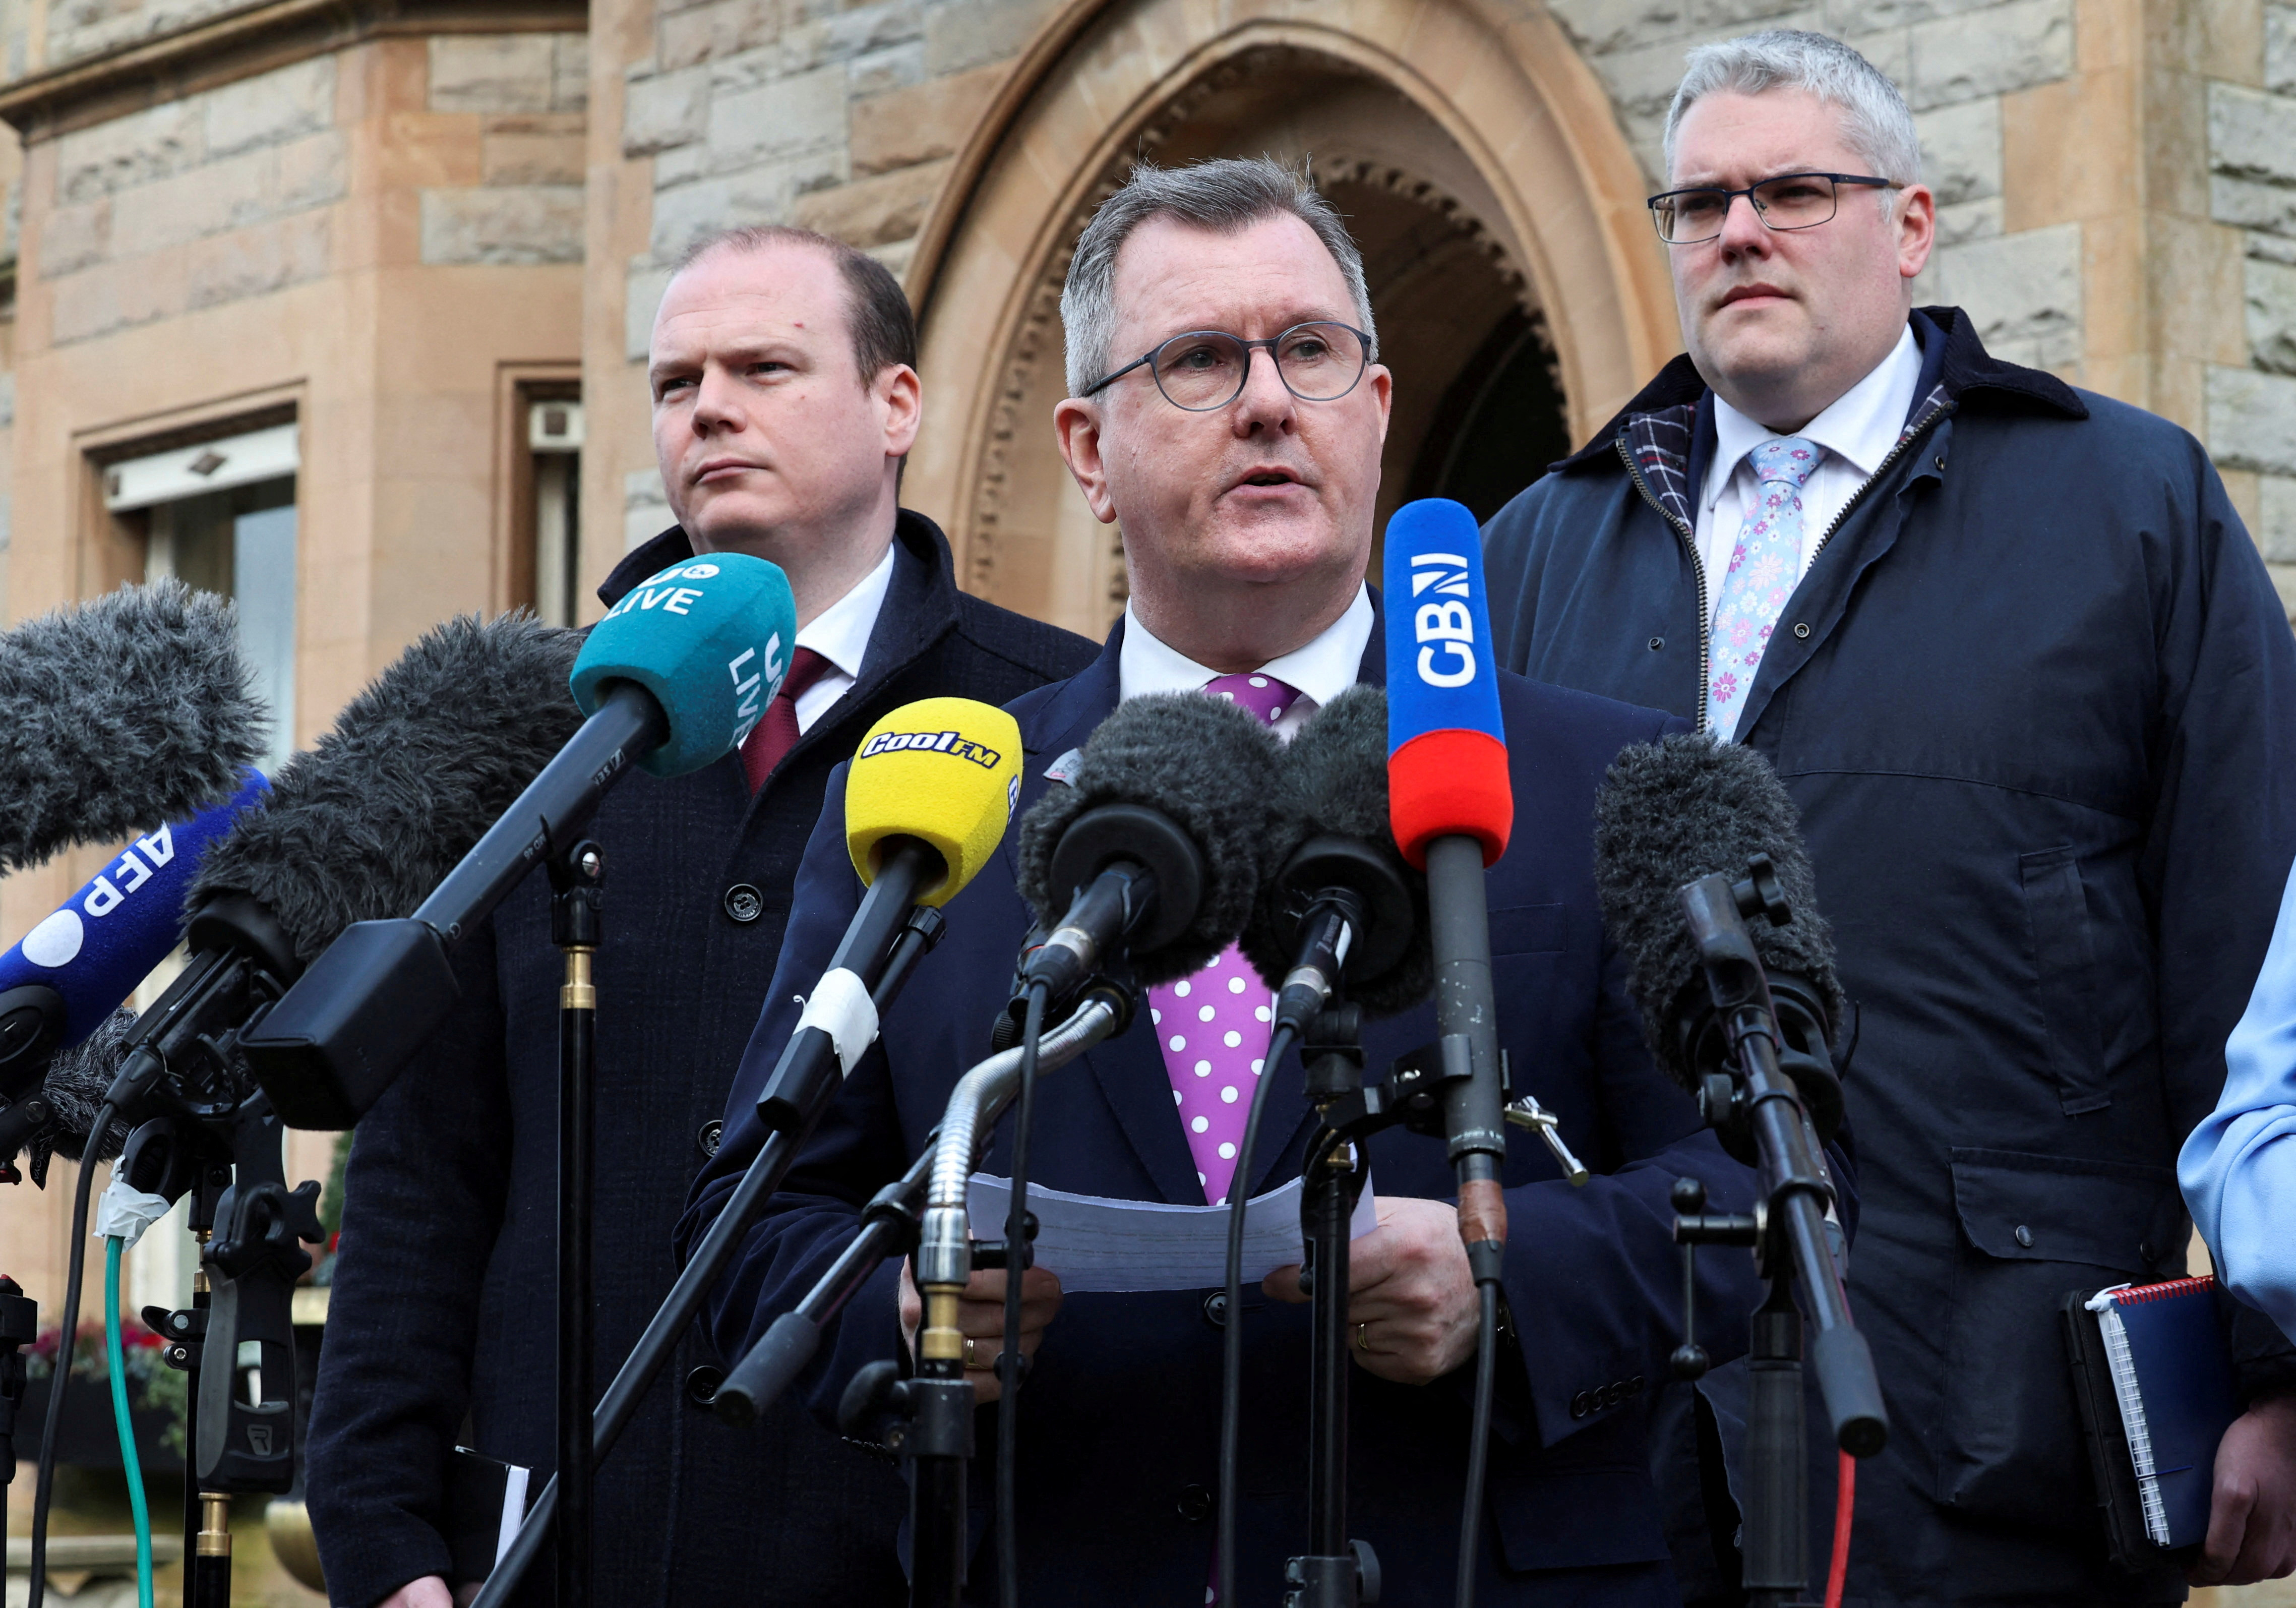 DUP leader Donaldson speaks after a meeting with British PM Sunak in Belfast